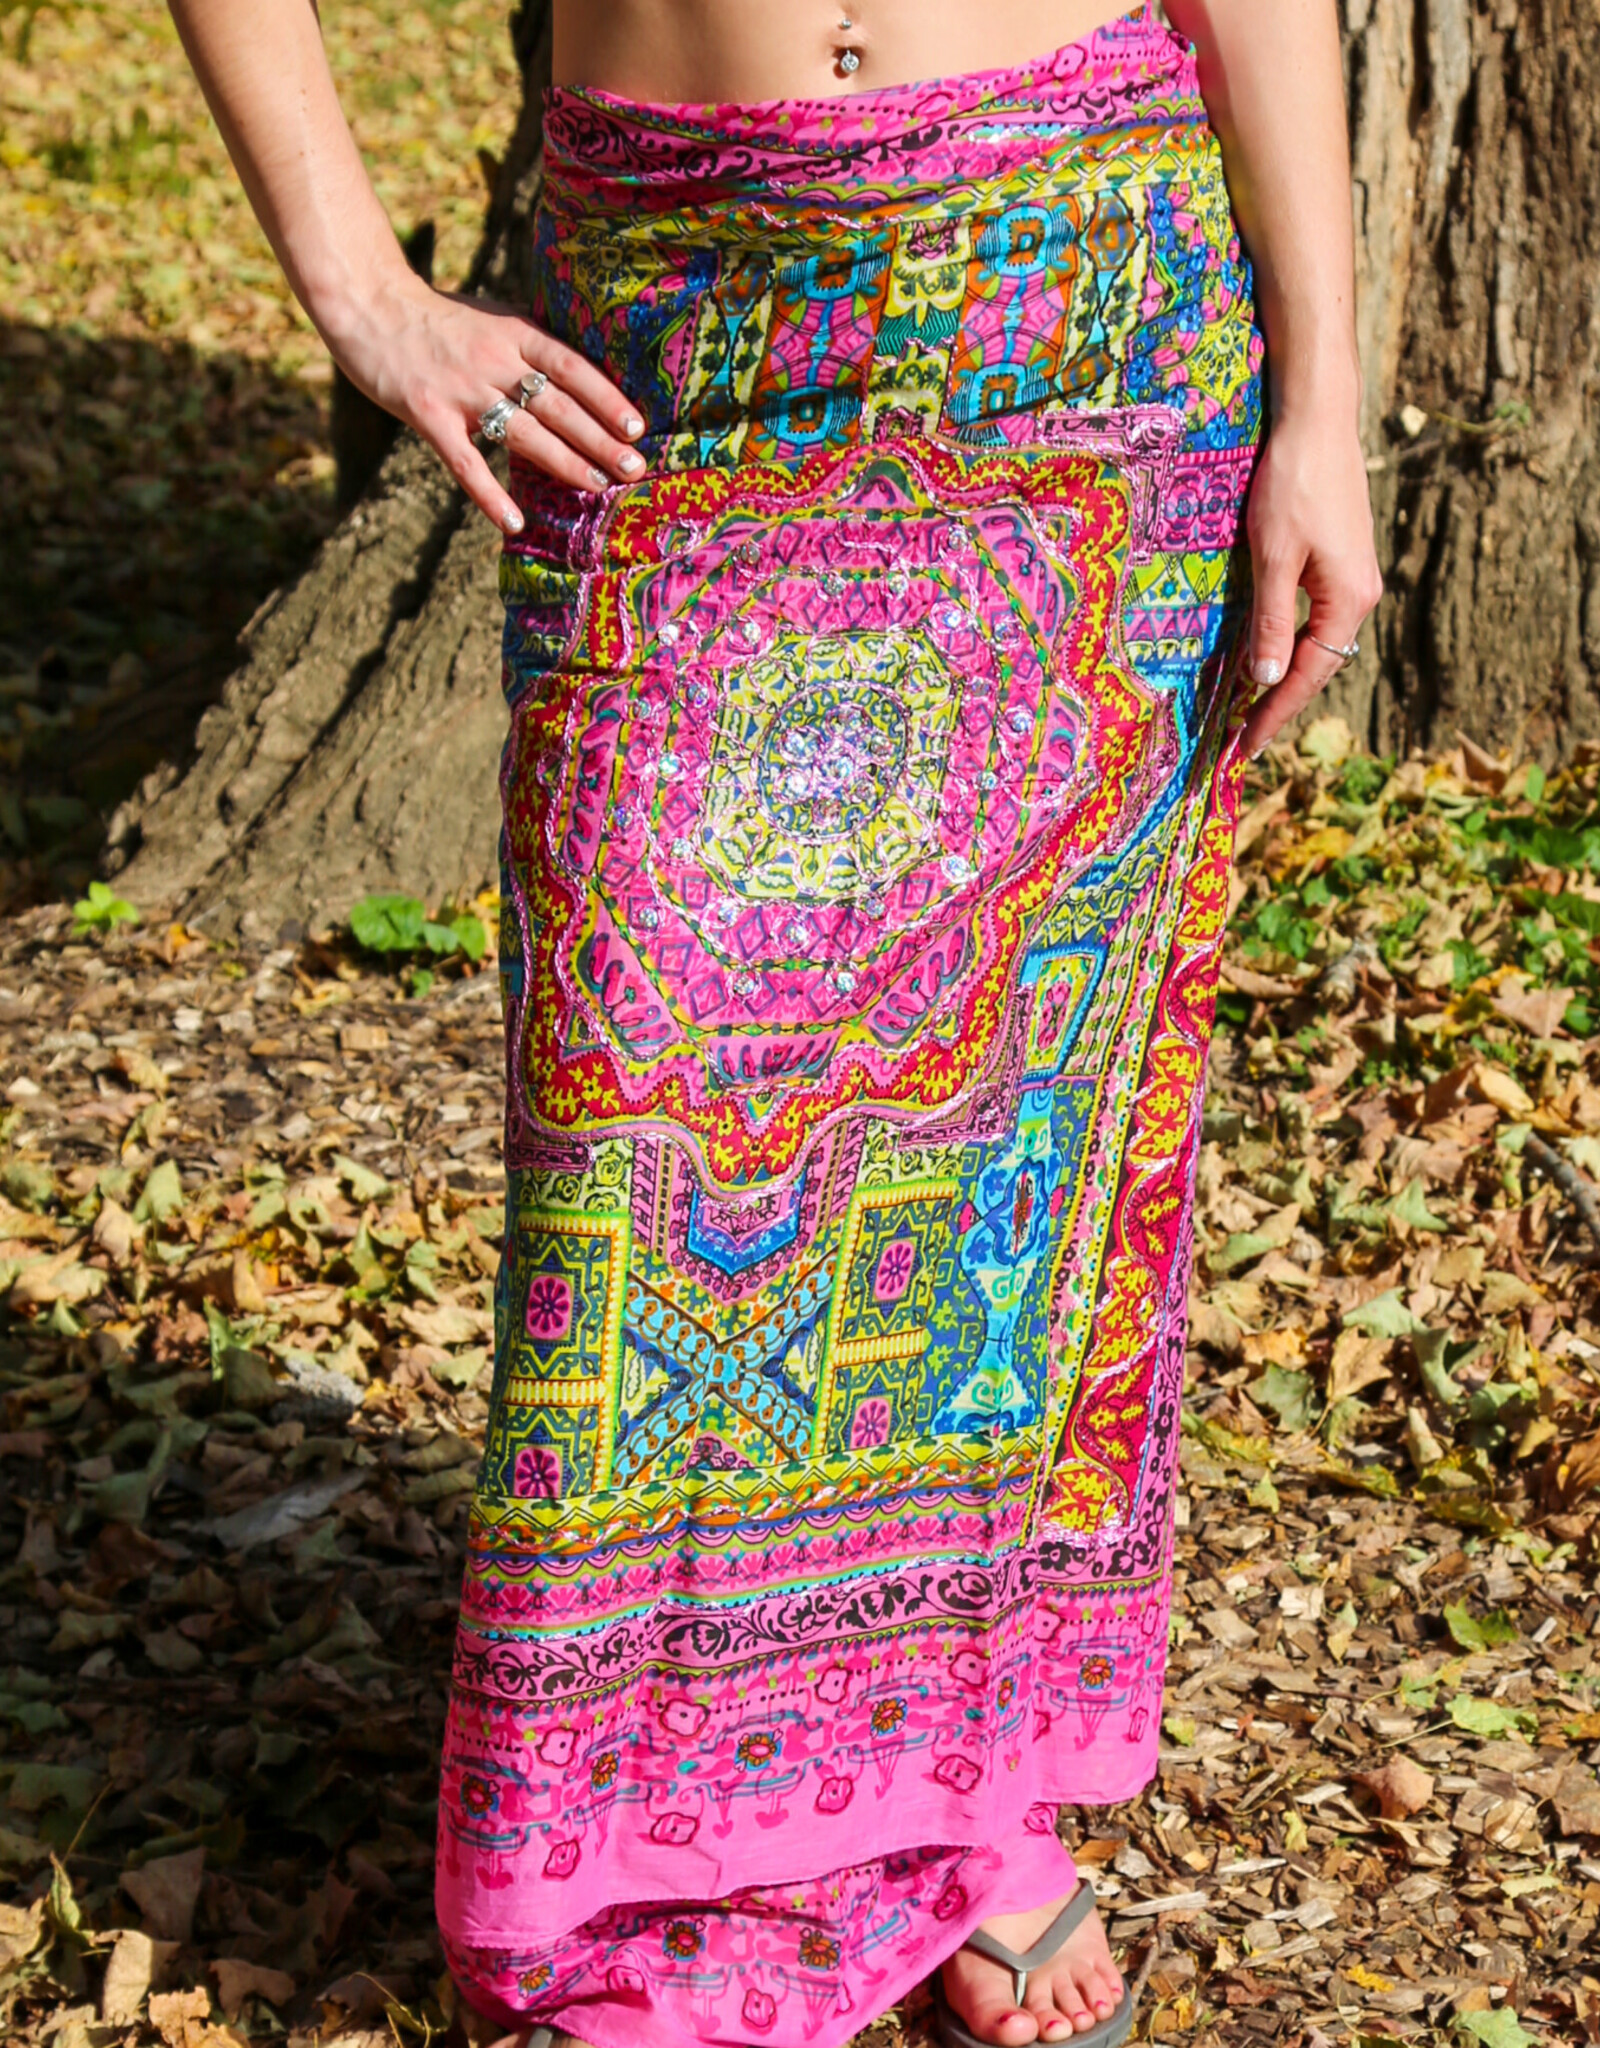 Geo Metallic Embroidered Cotton Sarong Cover-Up